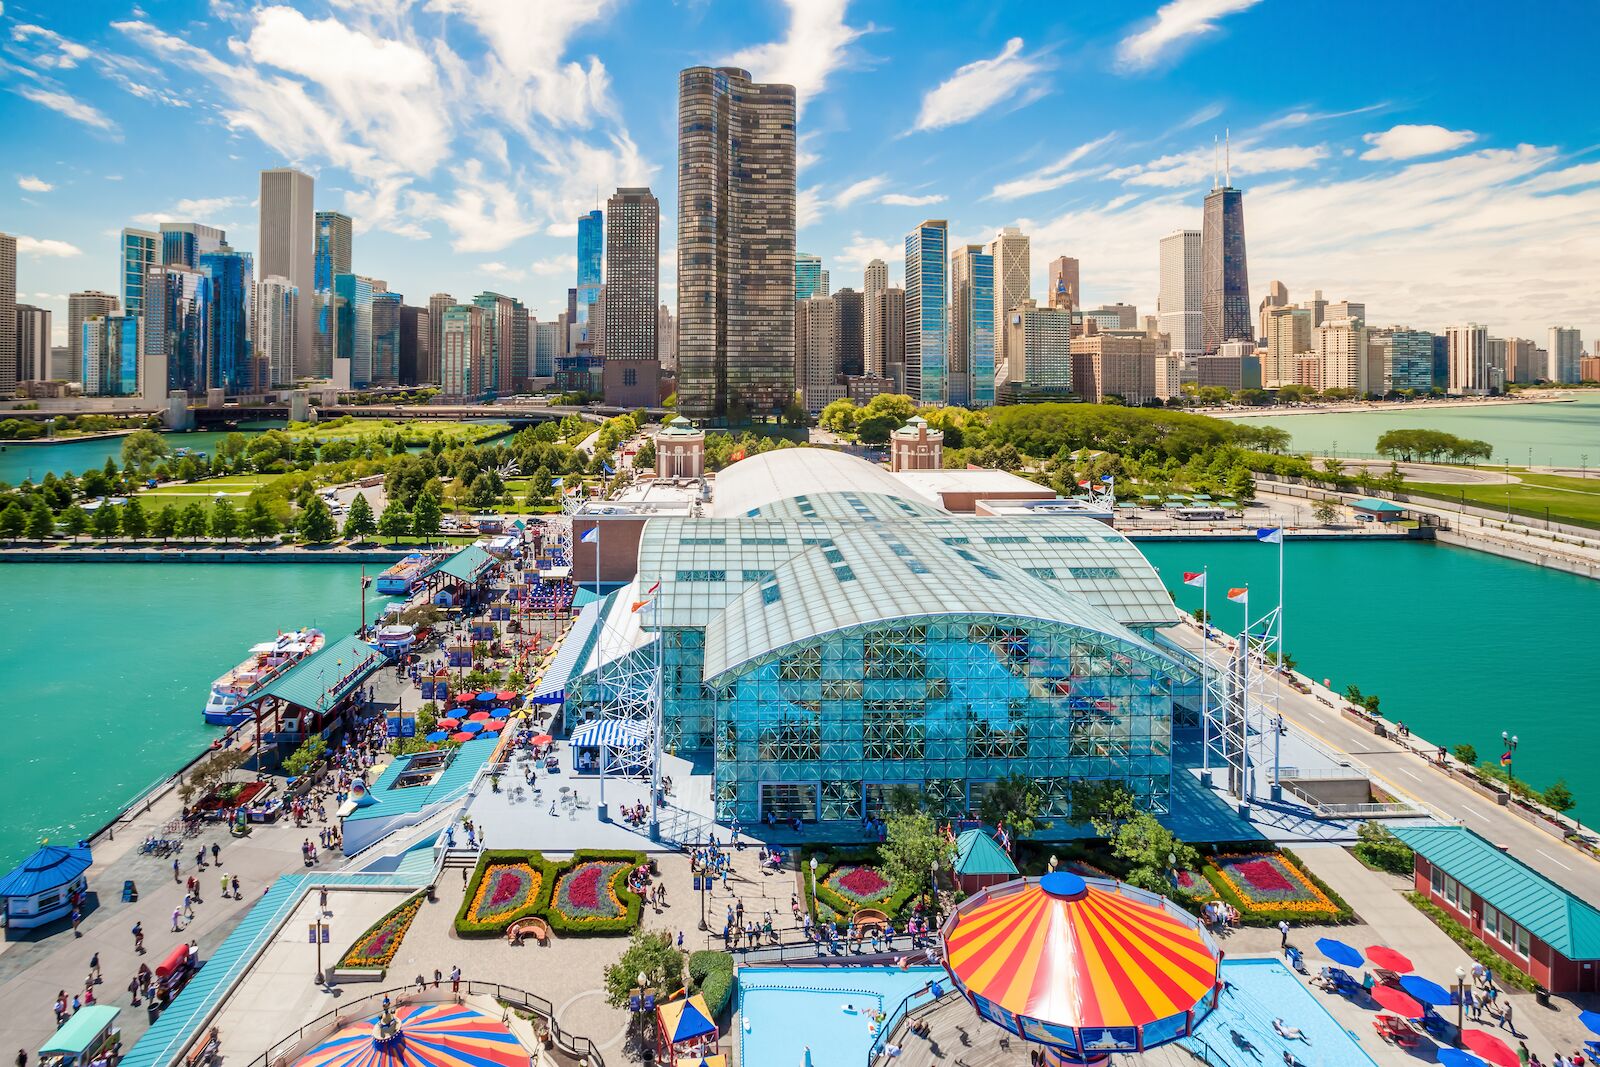 View of Navy Pier in Chicago, one of the free places you can go to if you're going to Lollapalooza Chicago this year